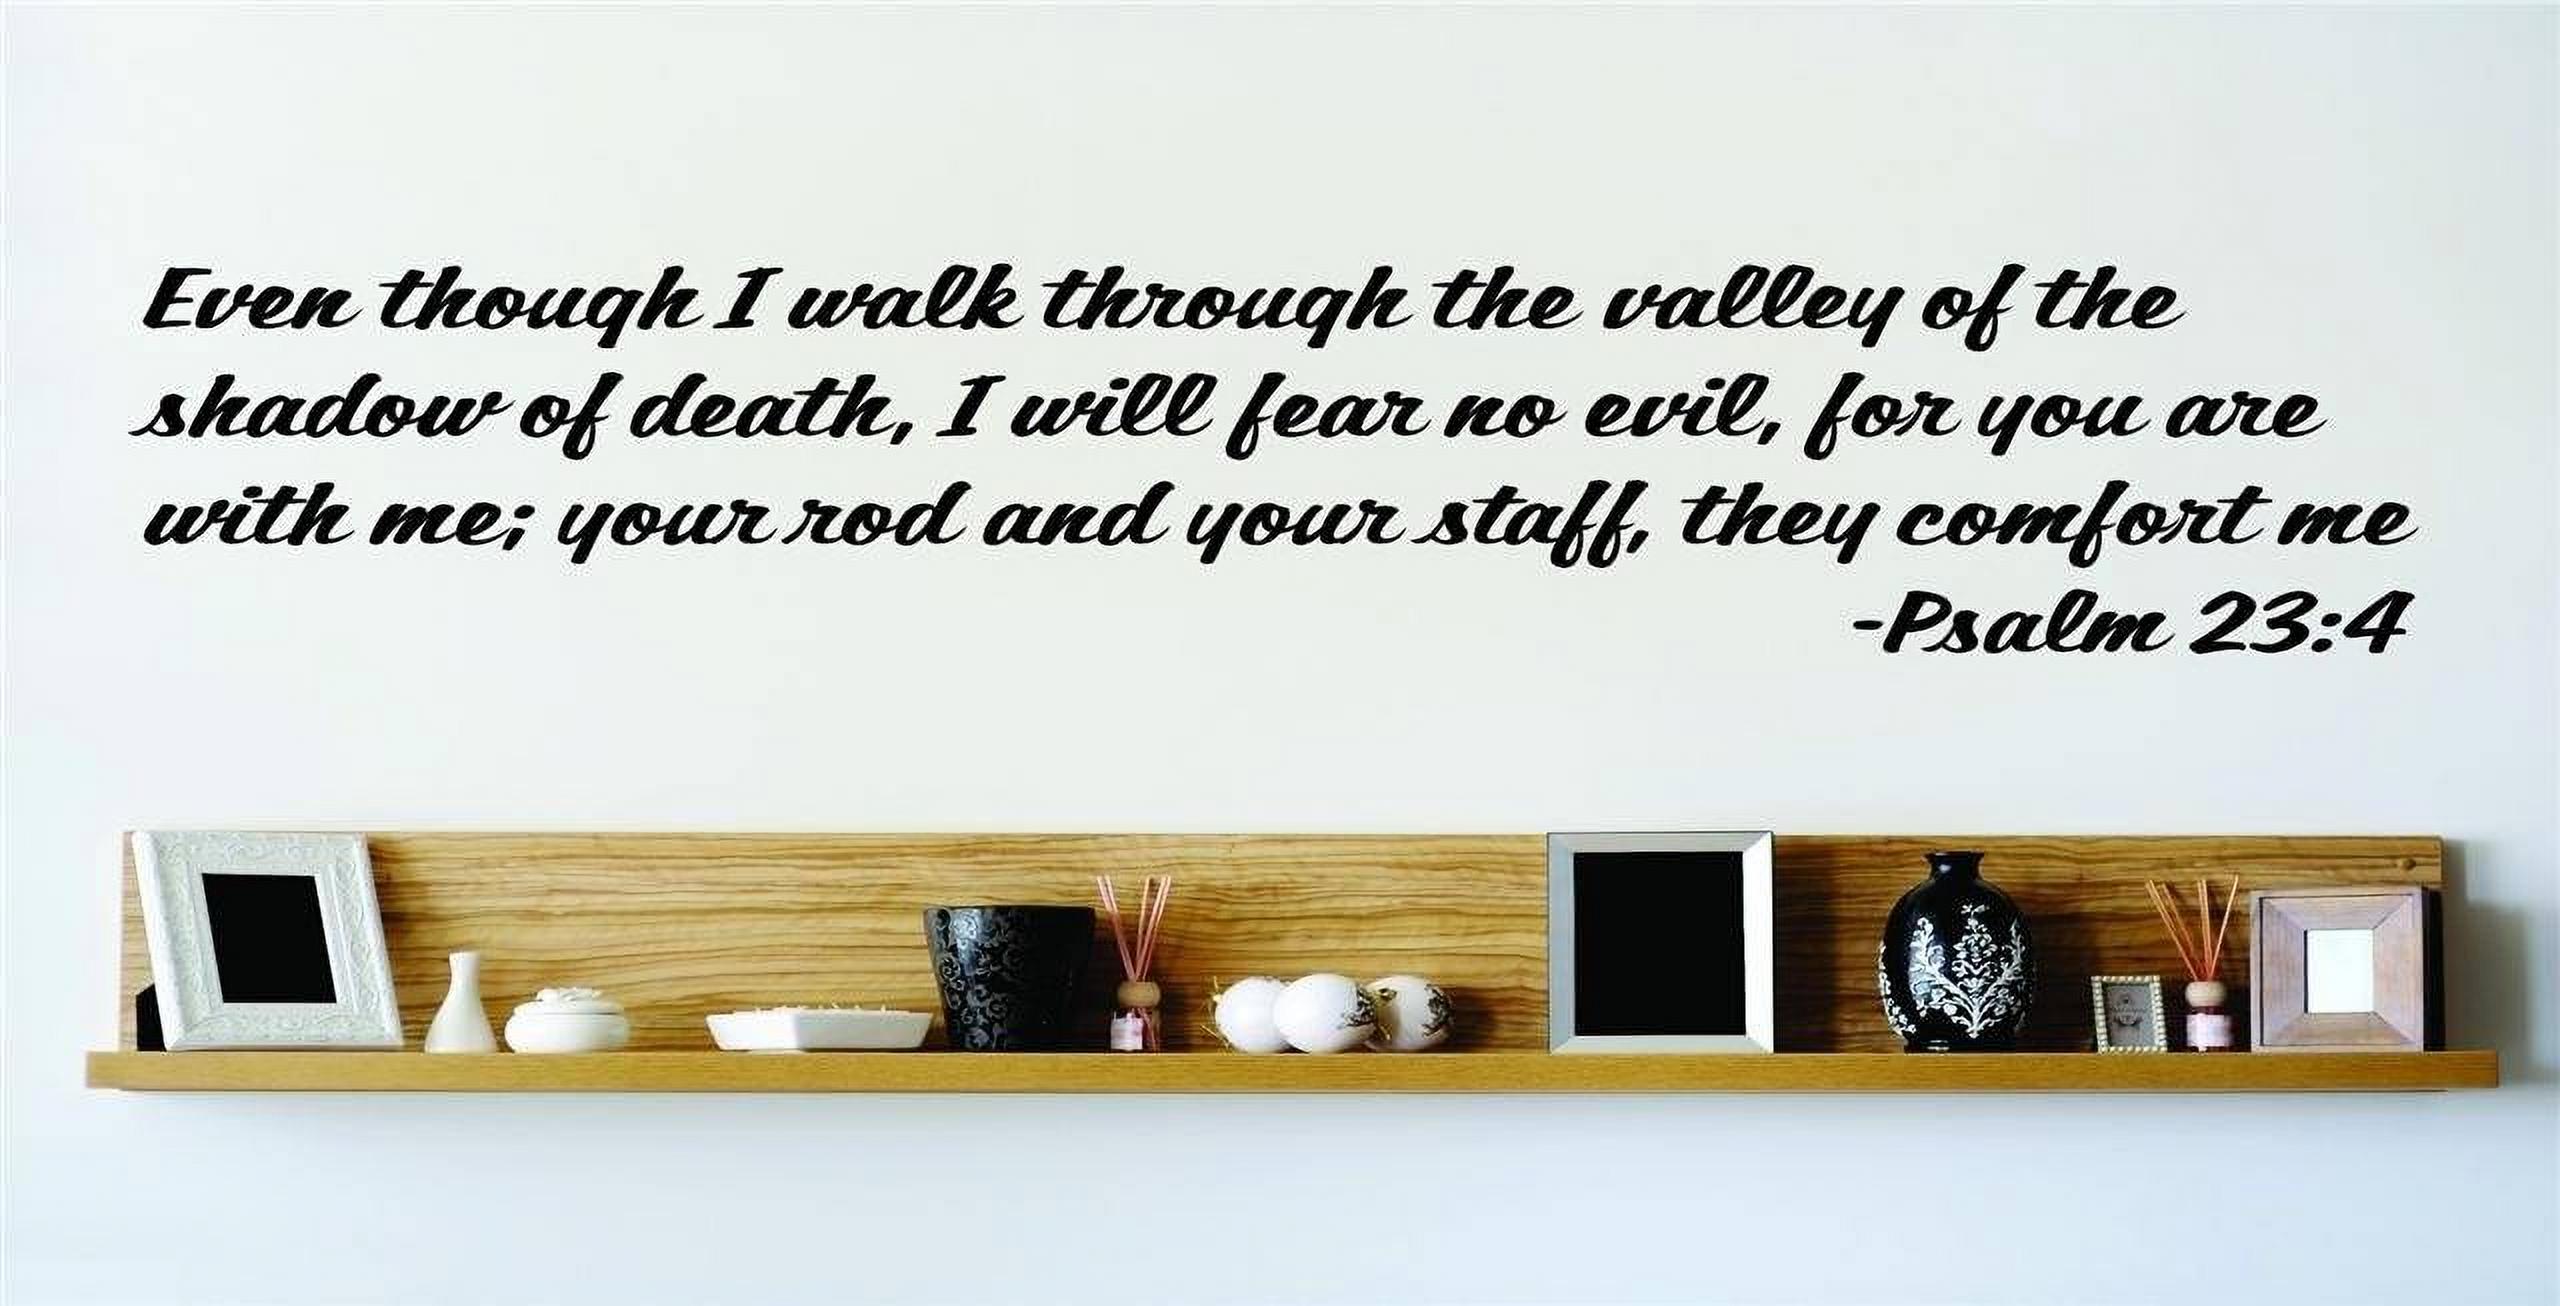 Custom Wall Decal Even though I walk through the valley of the shadow of death, I will fear no evil - Psalm 23:4 Bible Quote Wall 15x15 - image 1 of 1